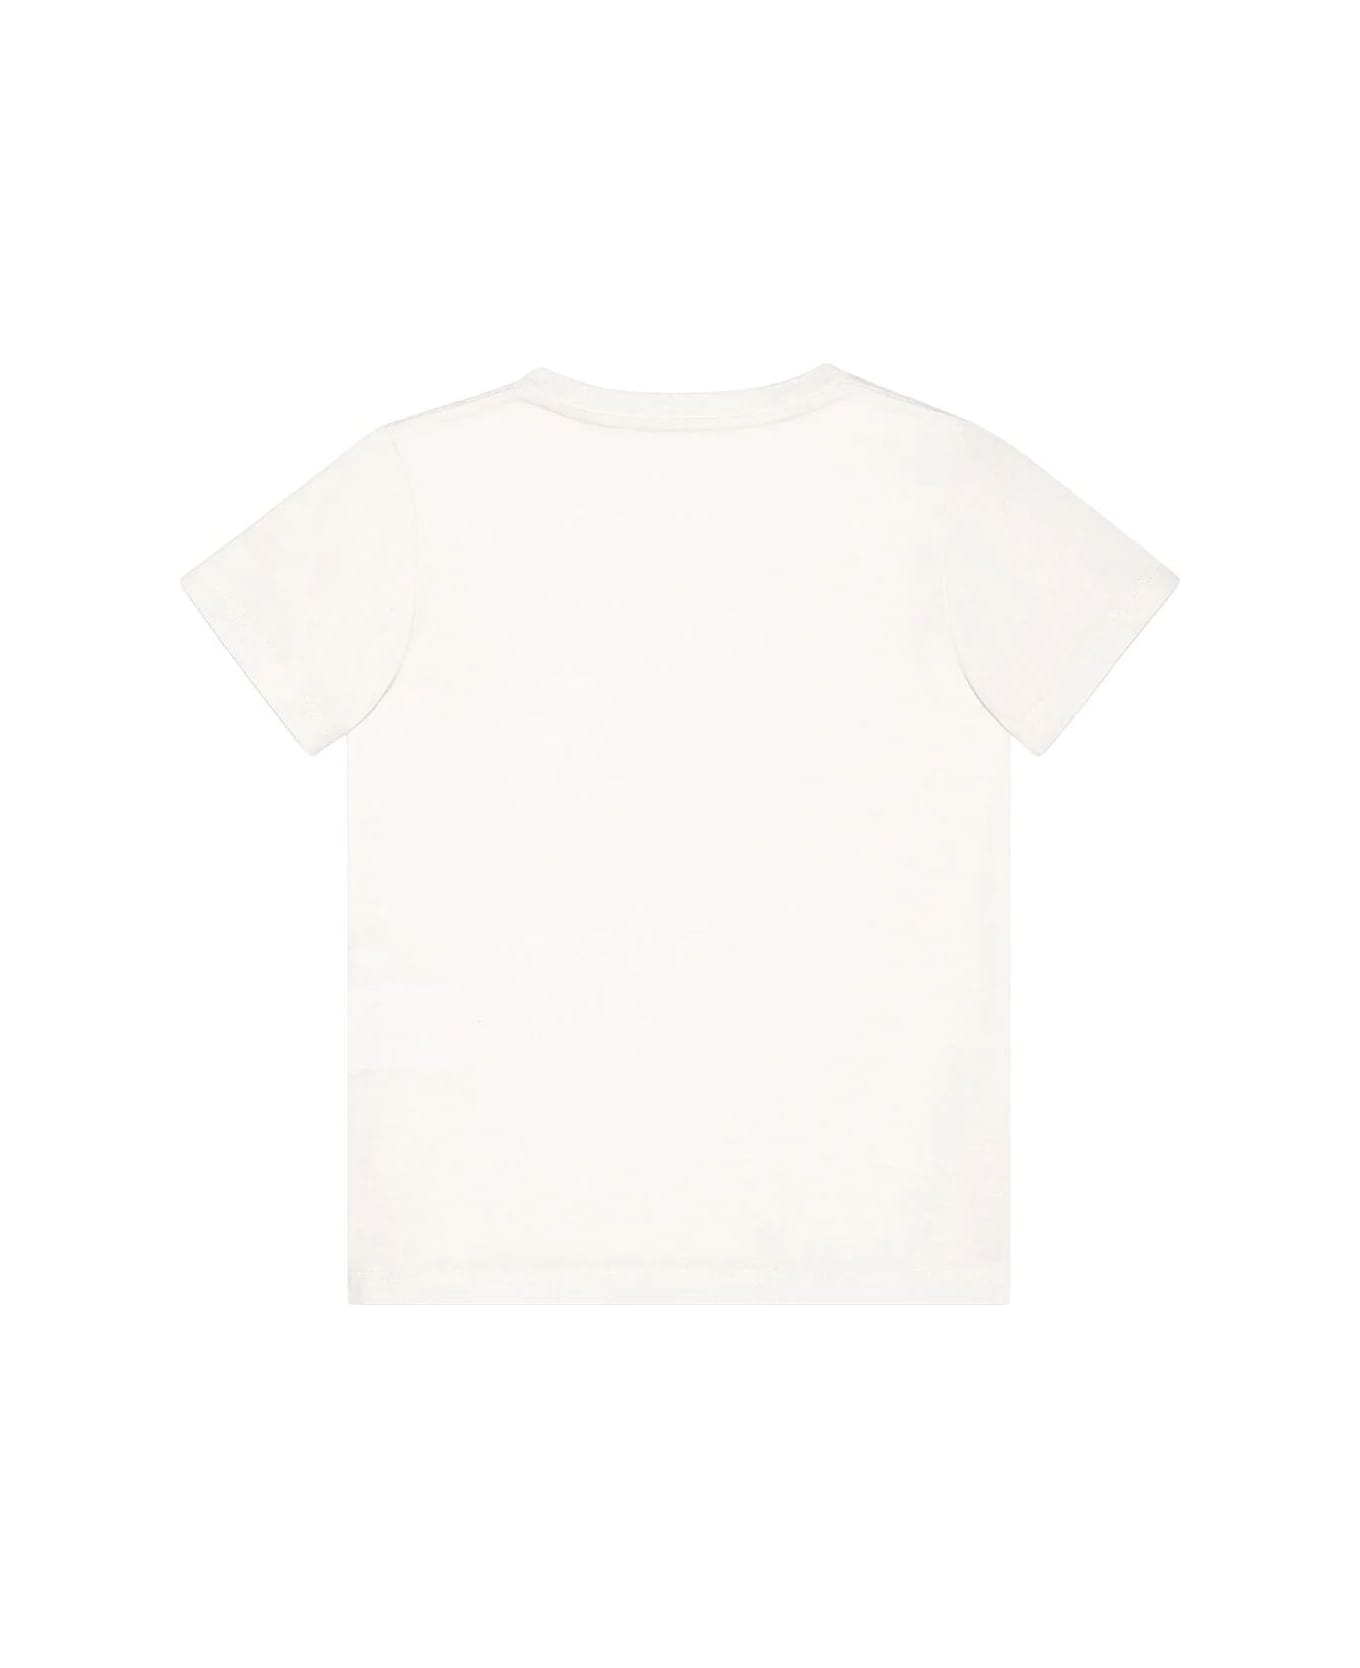 Gucci T-shirt Cotton Jersey - White Green Red